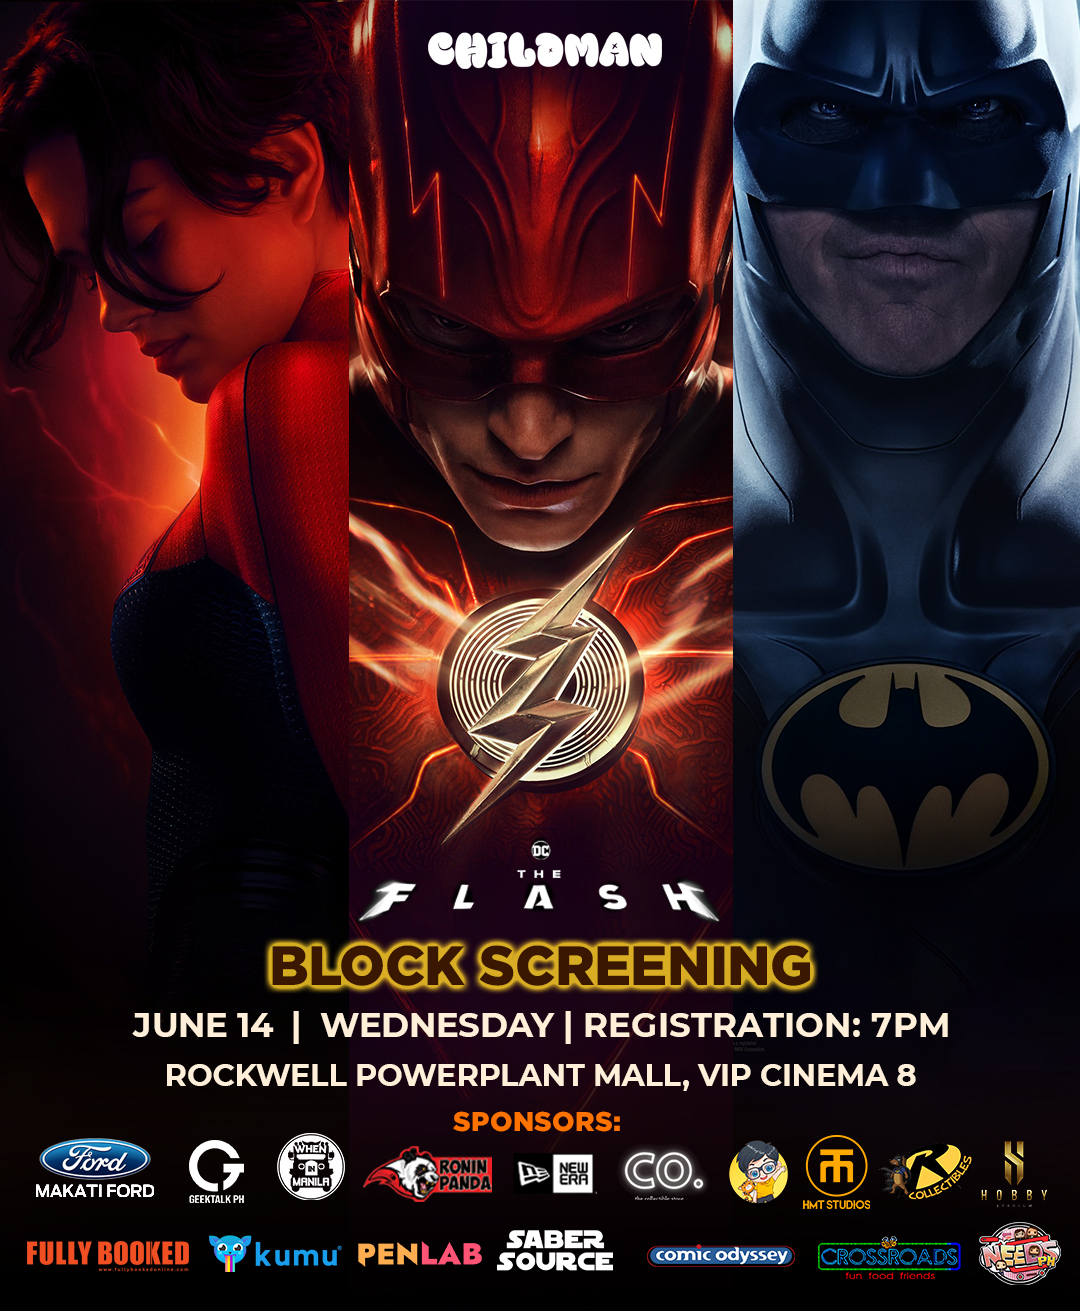 Join This Block Screening of DC Film "The Flash" on June 14 at Power Plant Mall